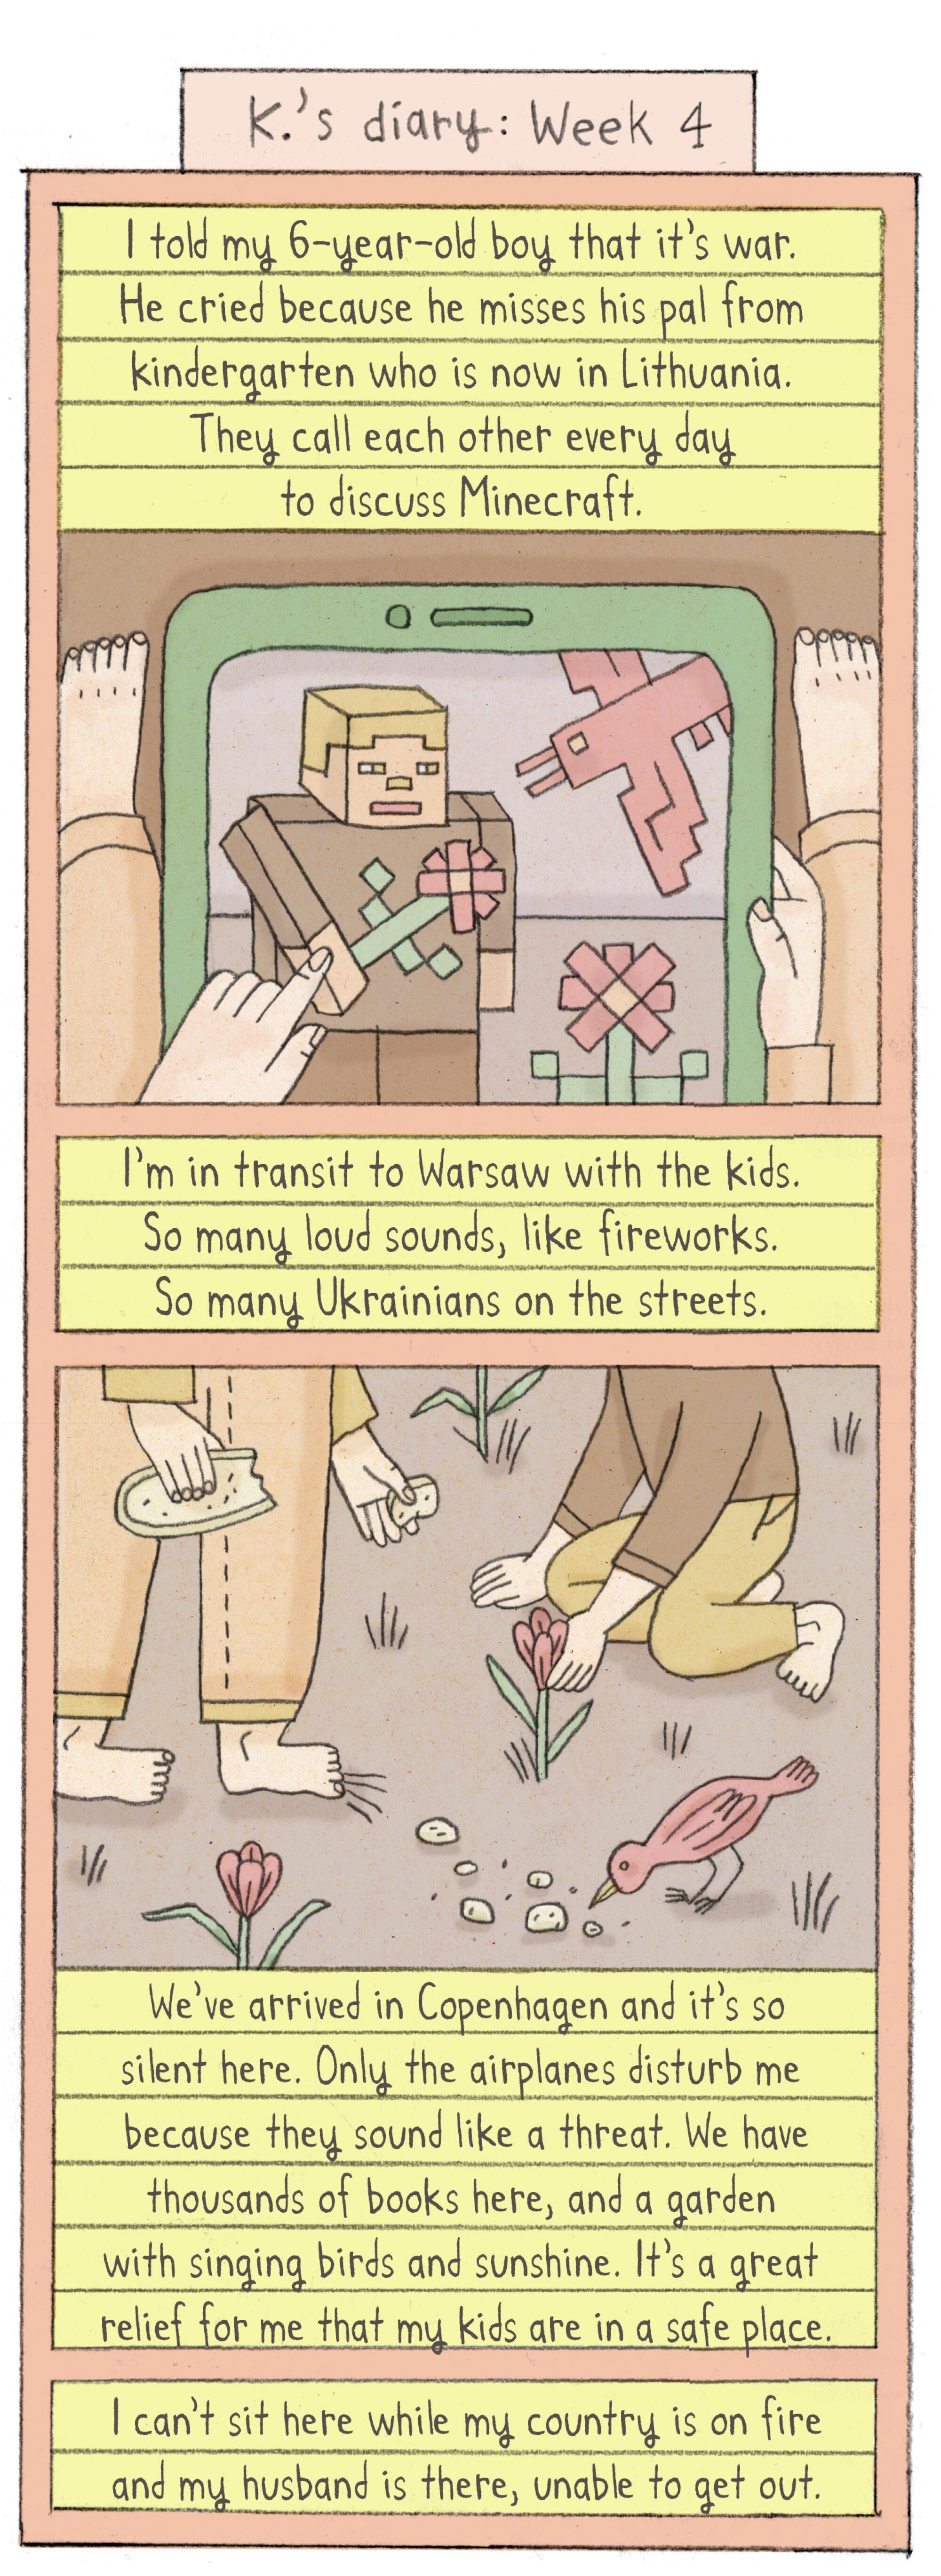 comic panels describe talking to 6 year old about war, missing friends, discussing minecraft, arriving in copenhagen.